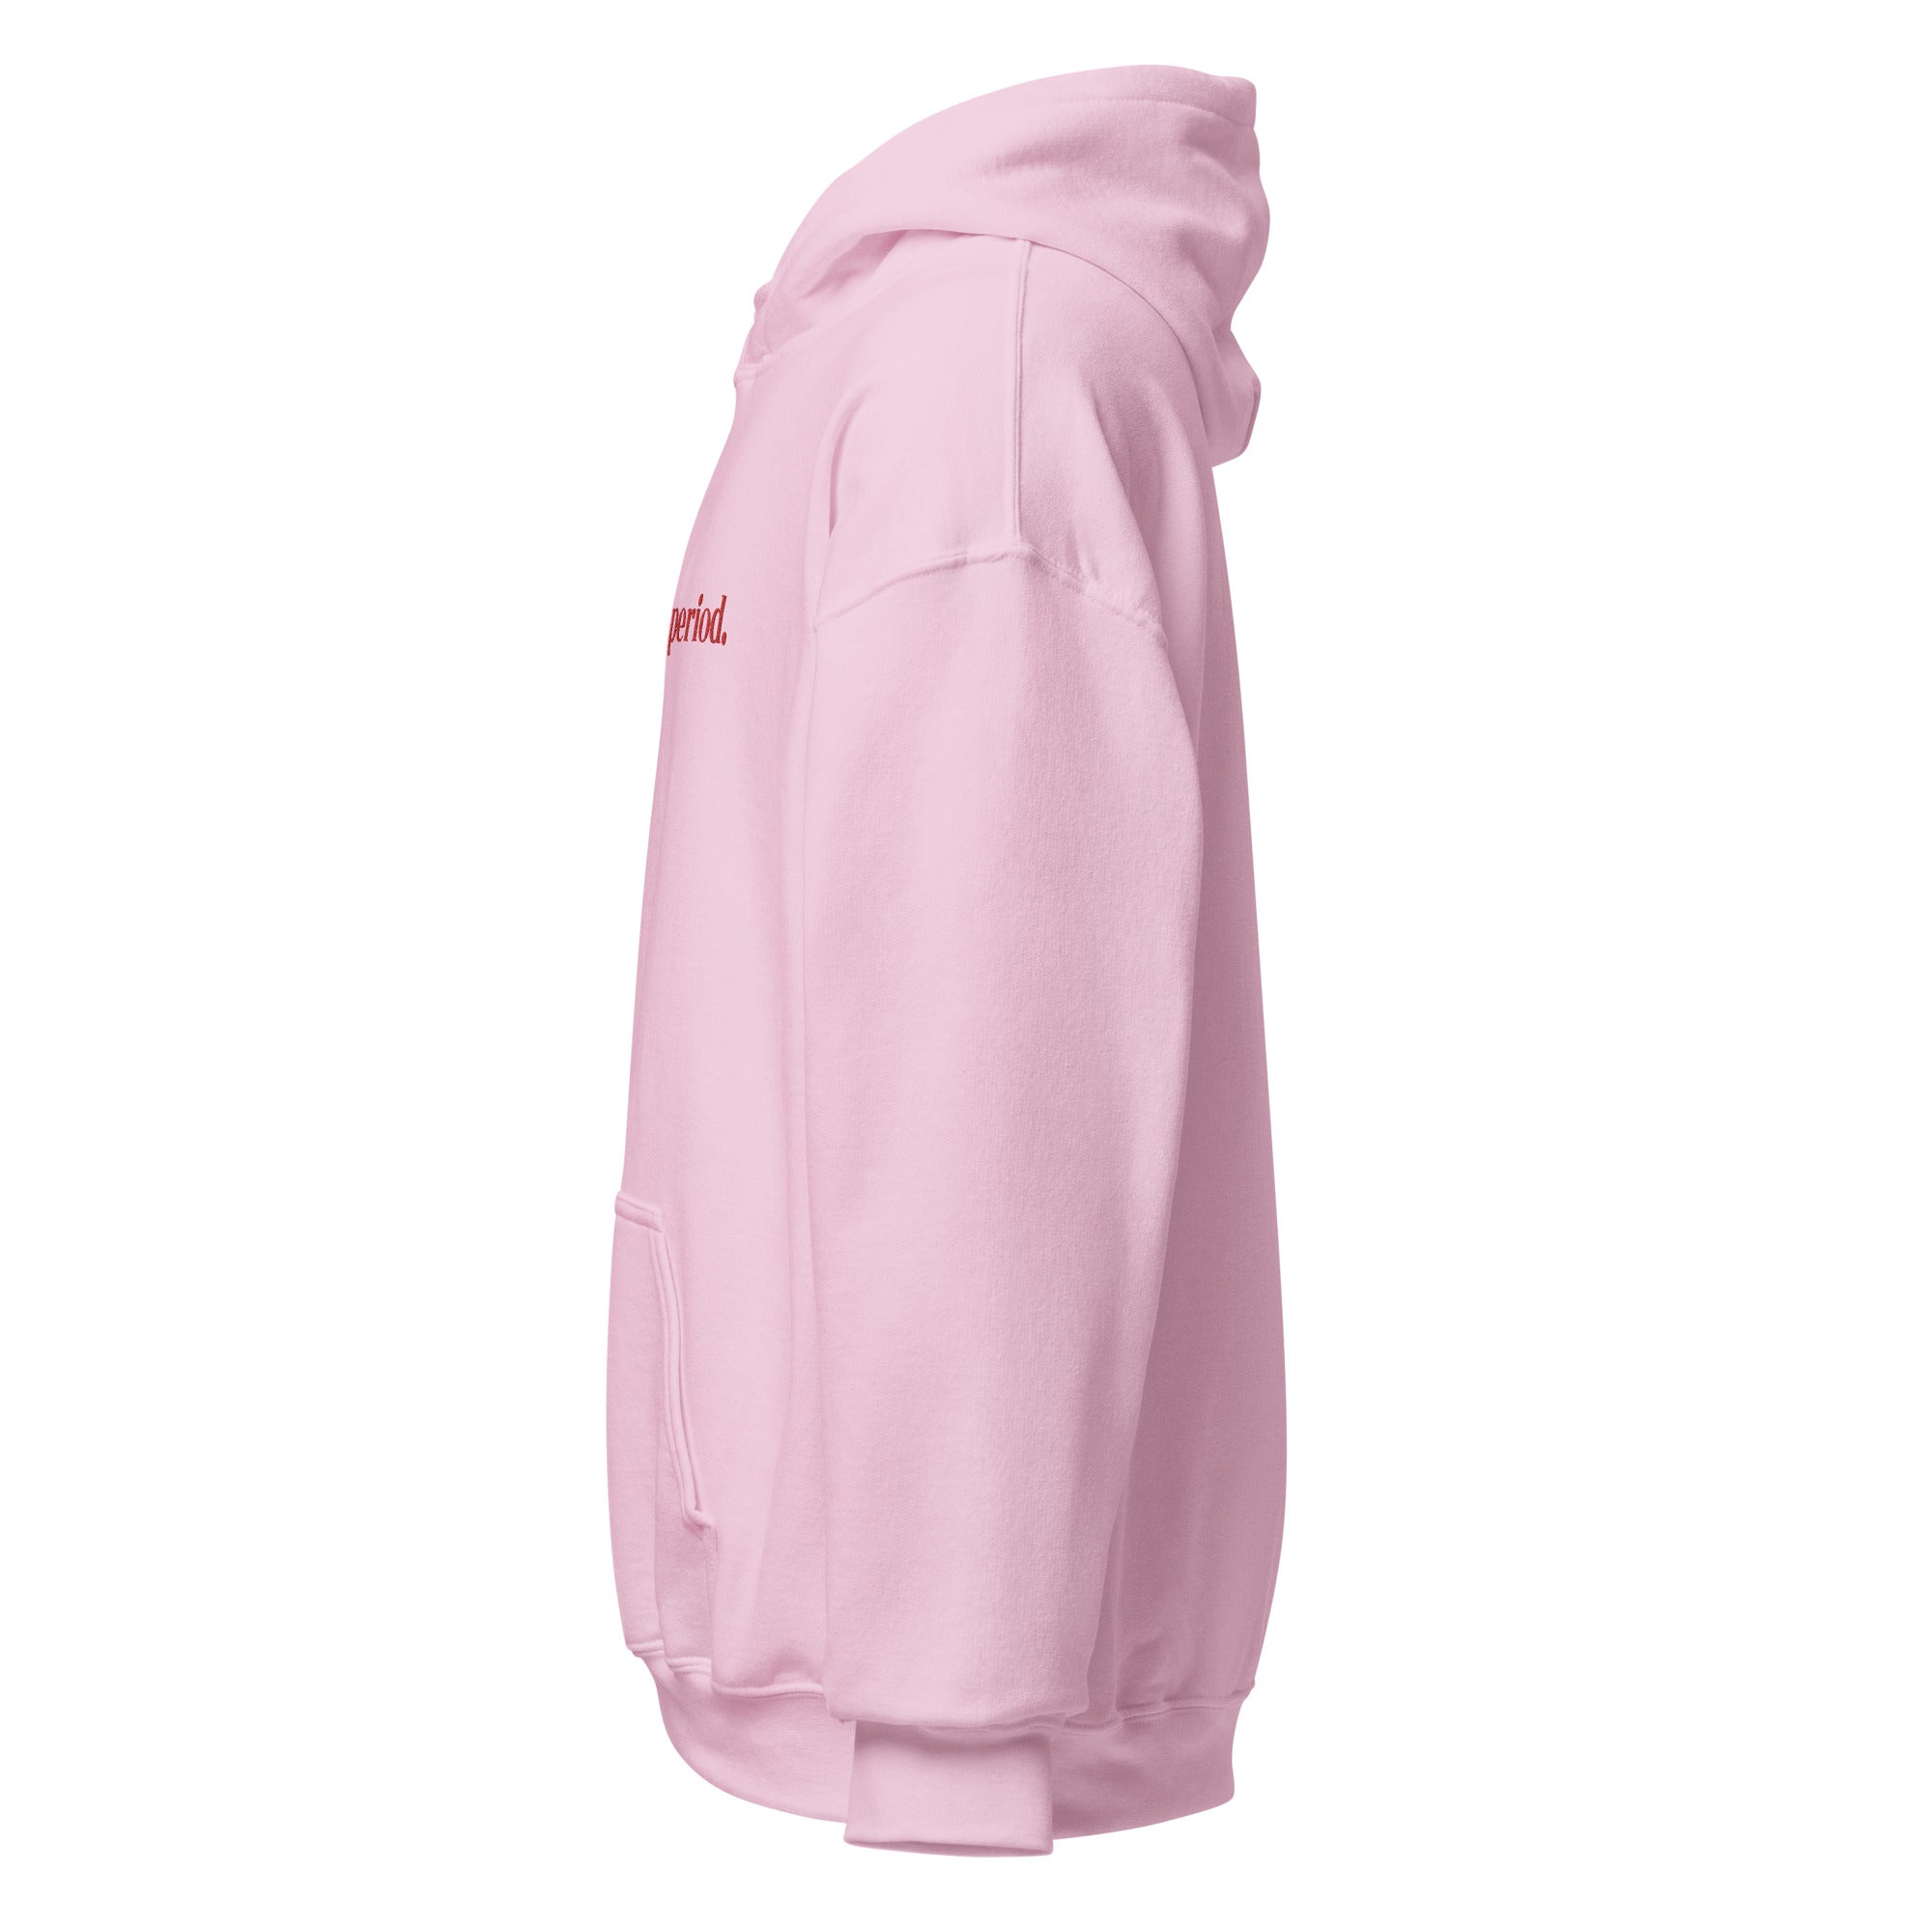 I'm On My Period - Pink/White Hoodie